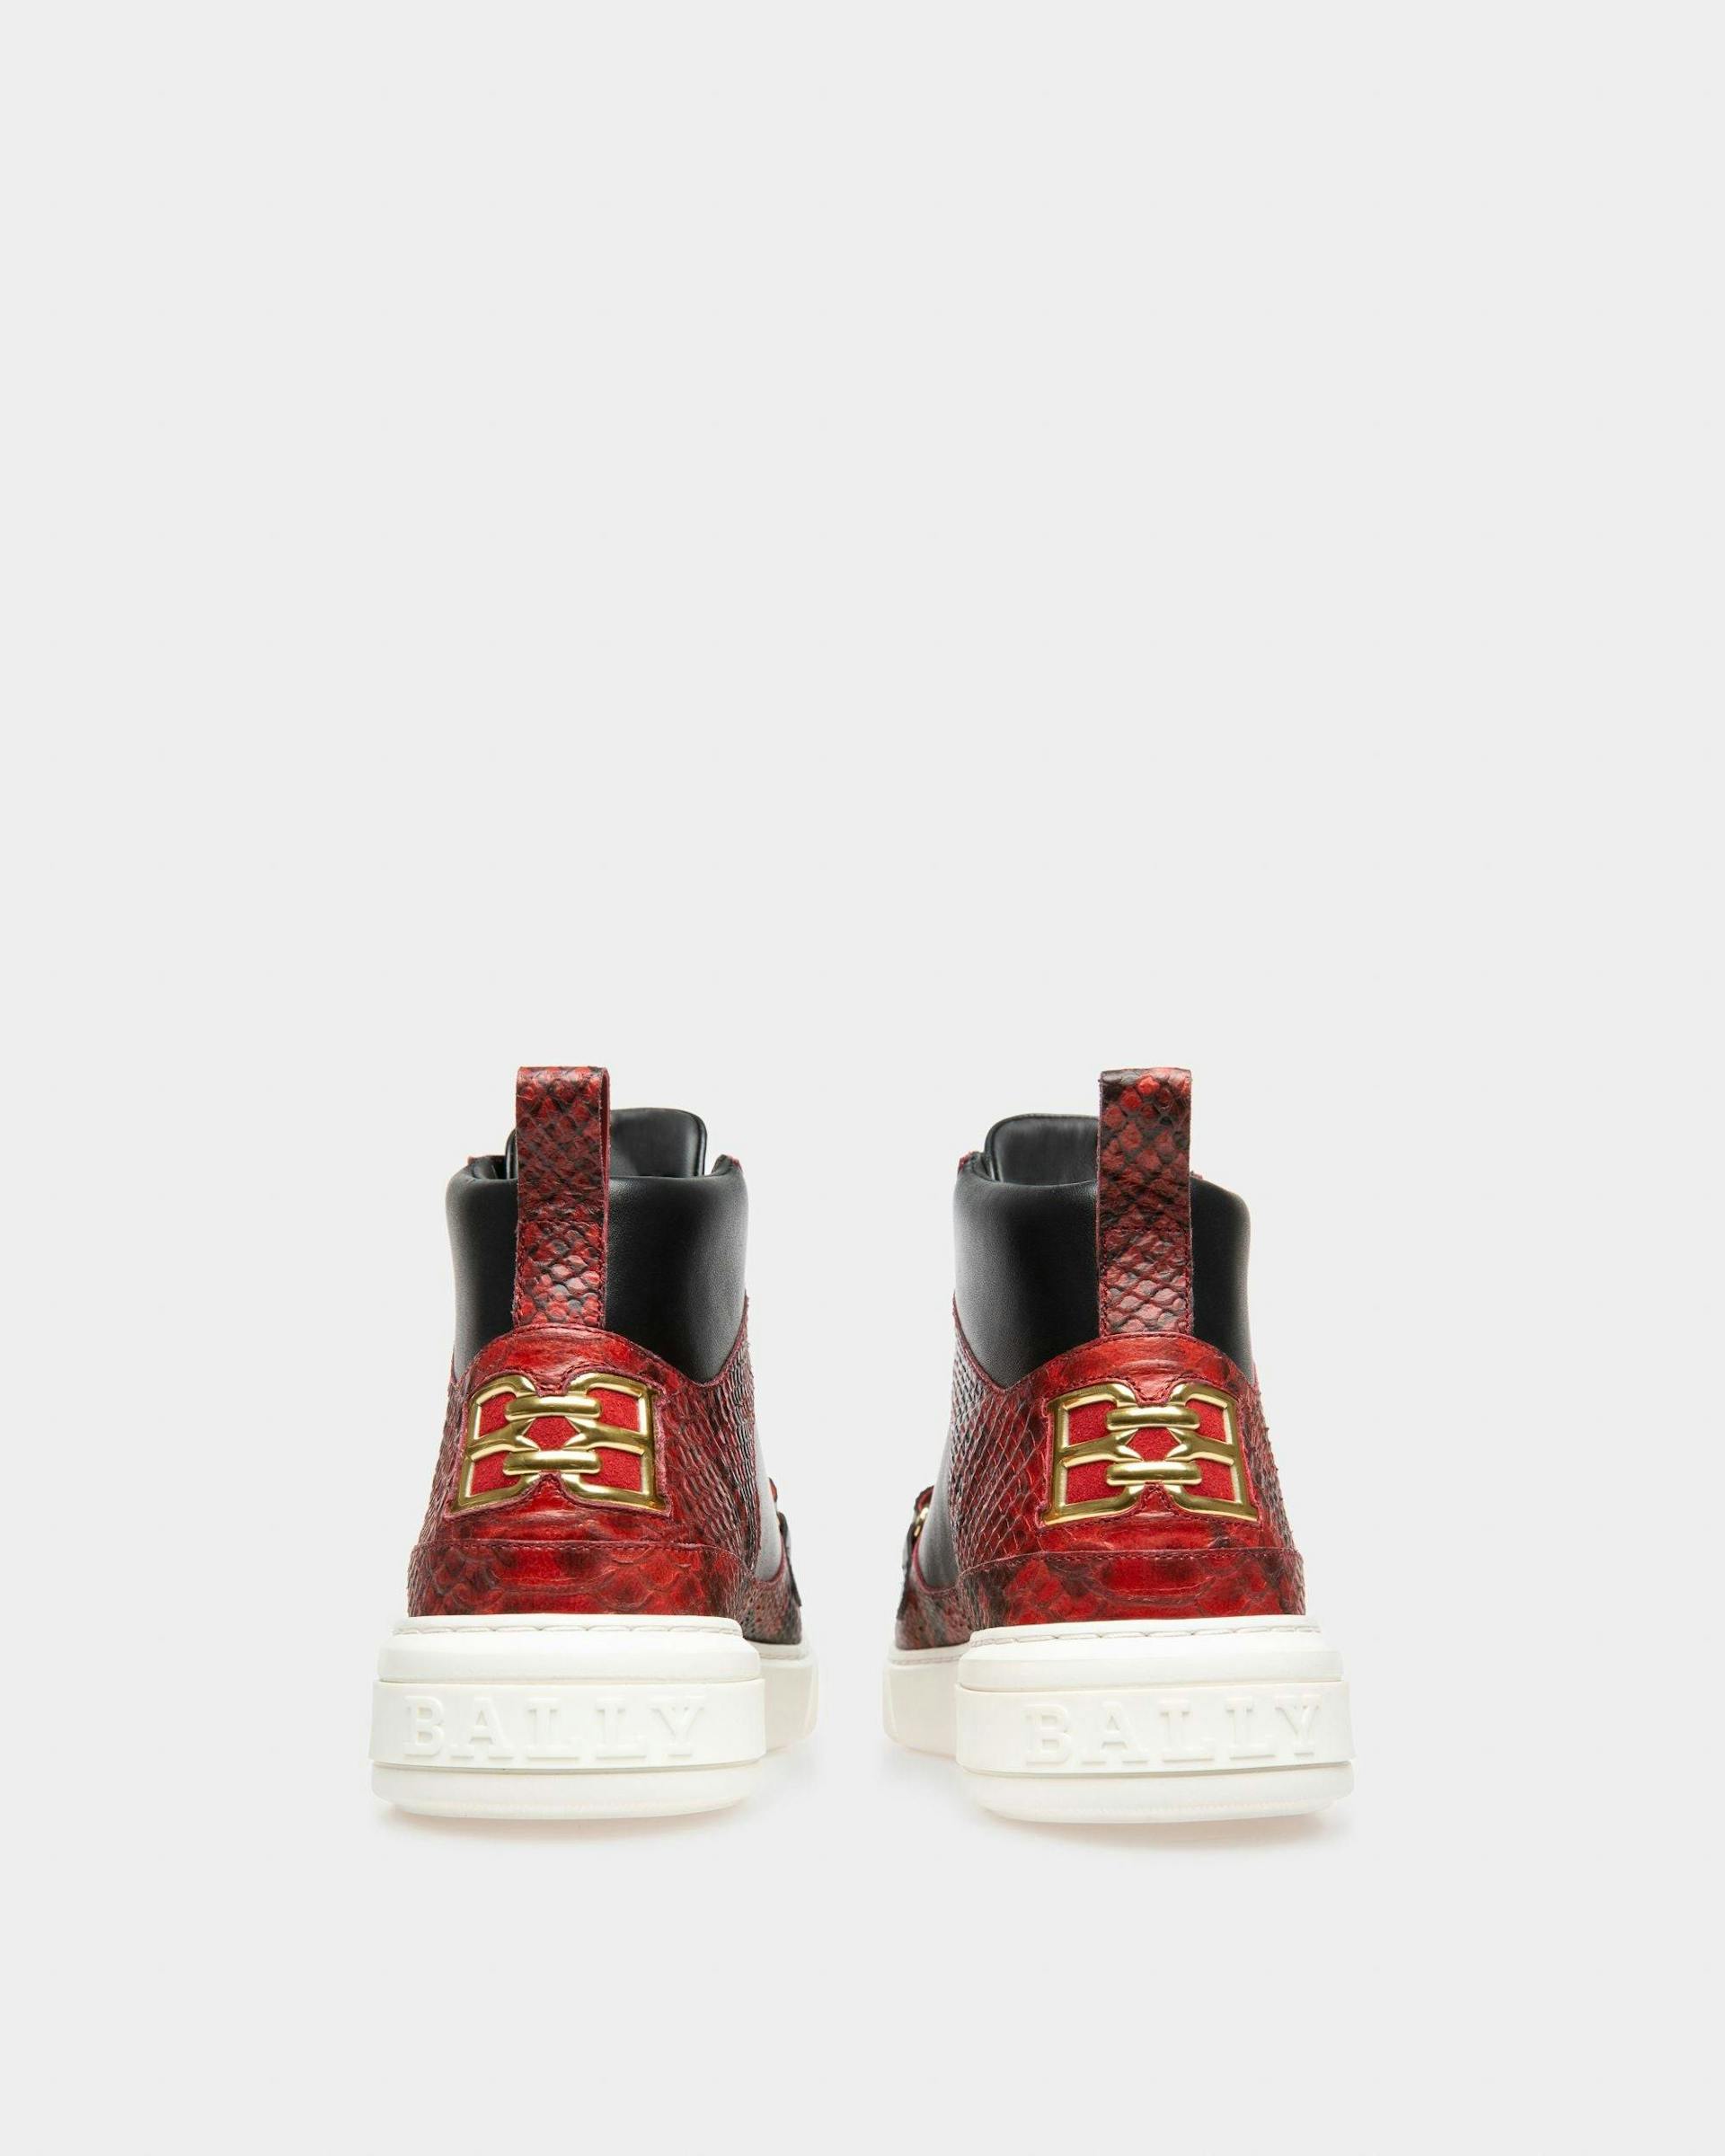 Merryk Leather Sneakers In Bally Red & Black - Men's - Bally - 04